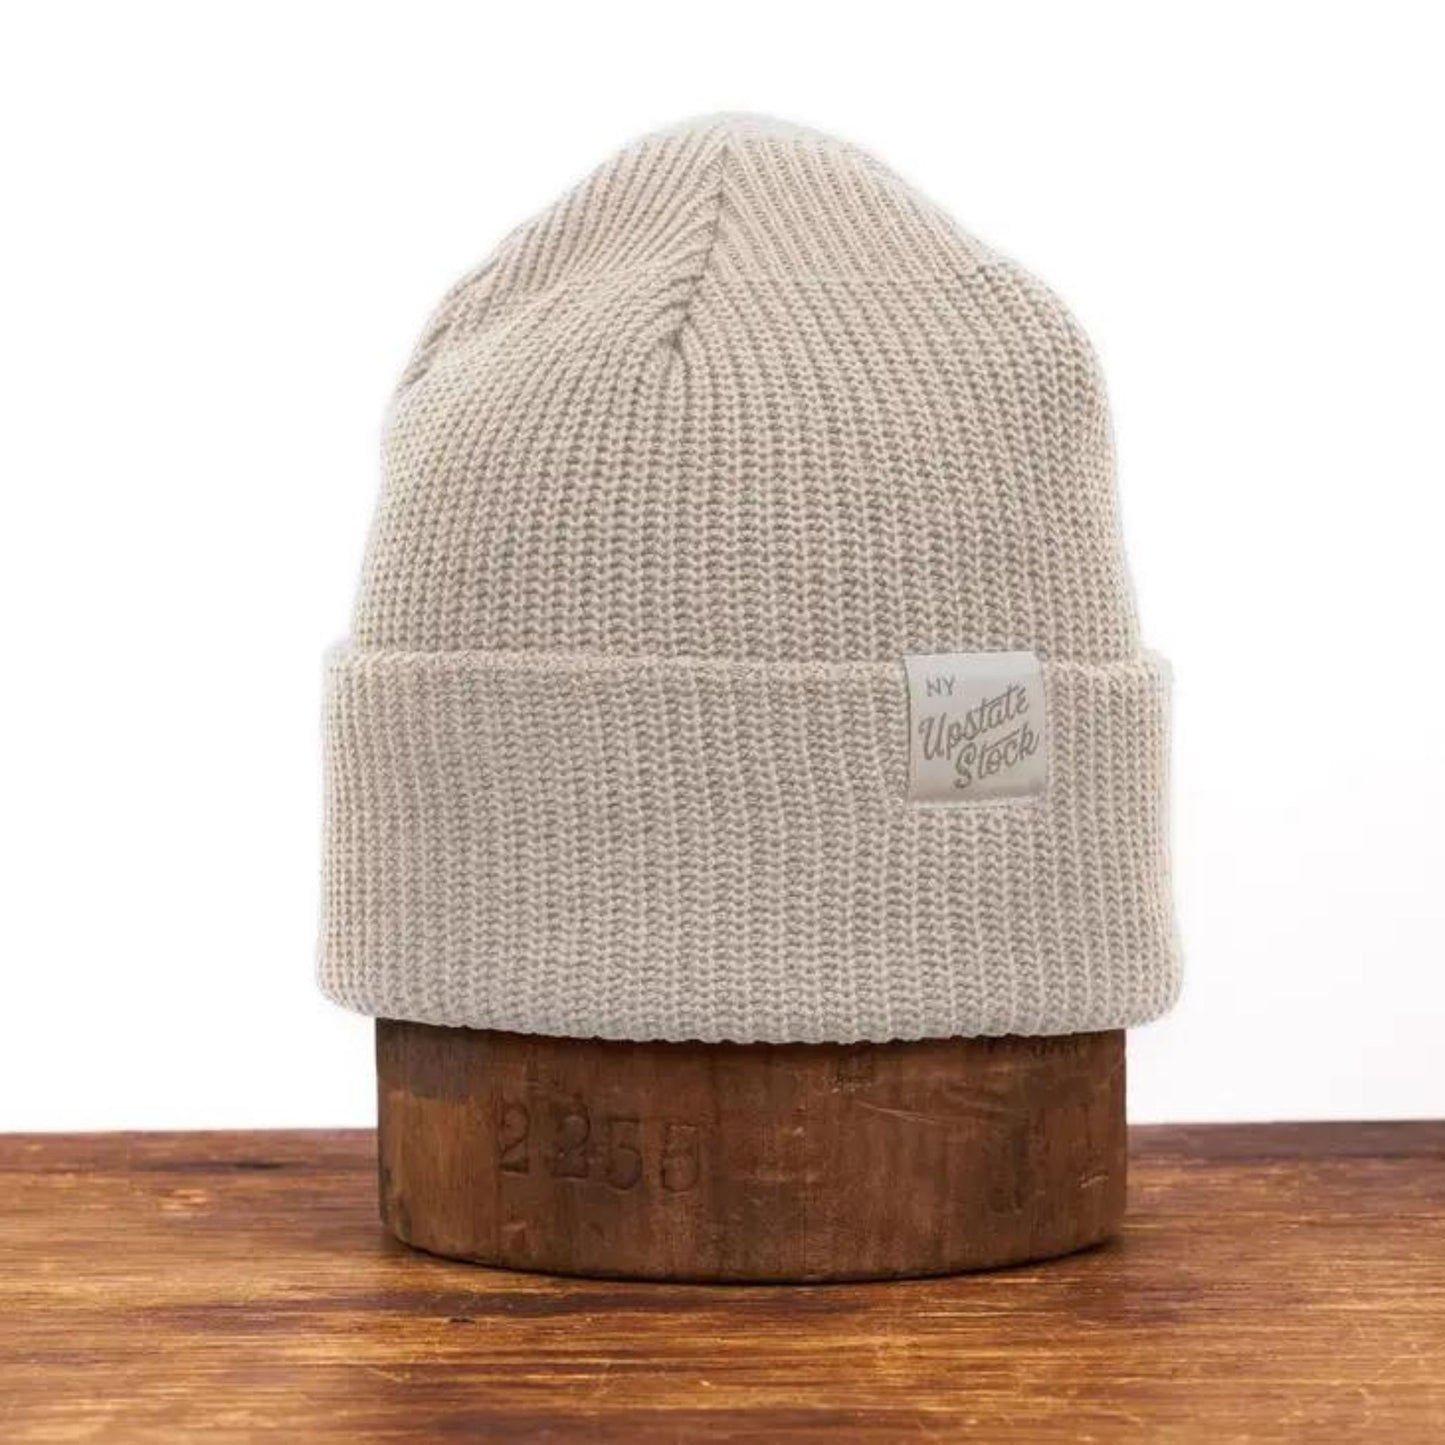 Upcycled Wool Watchcap